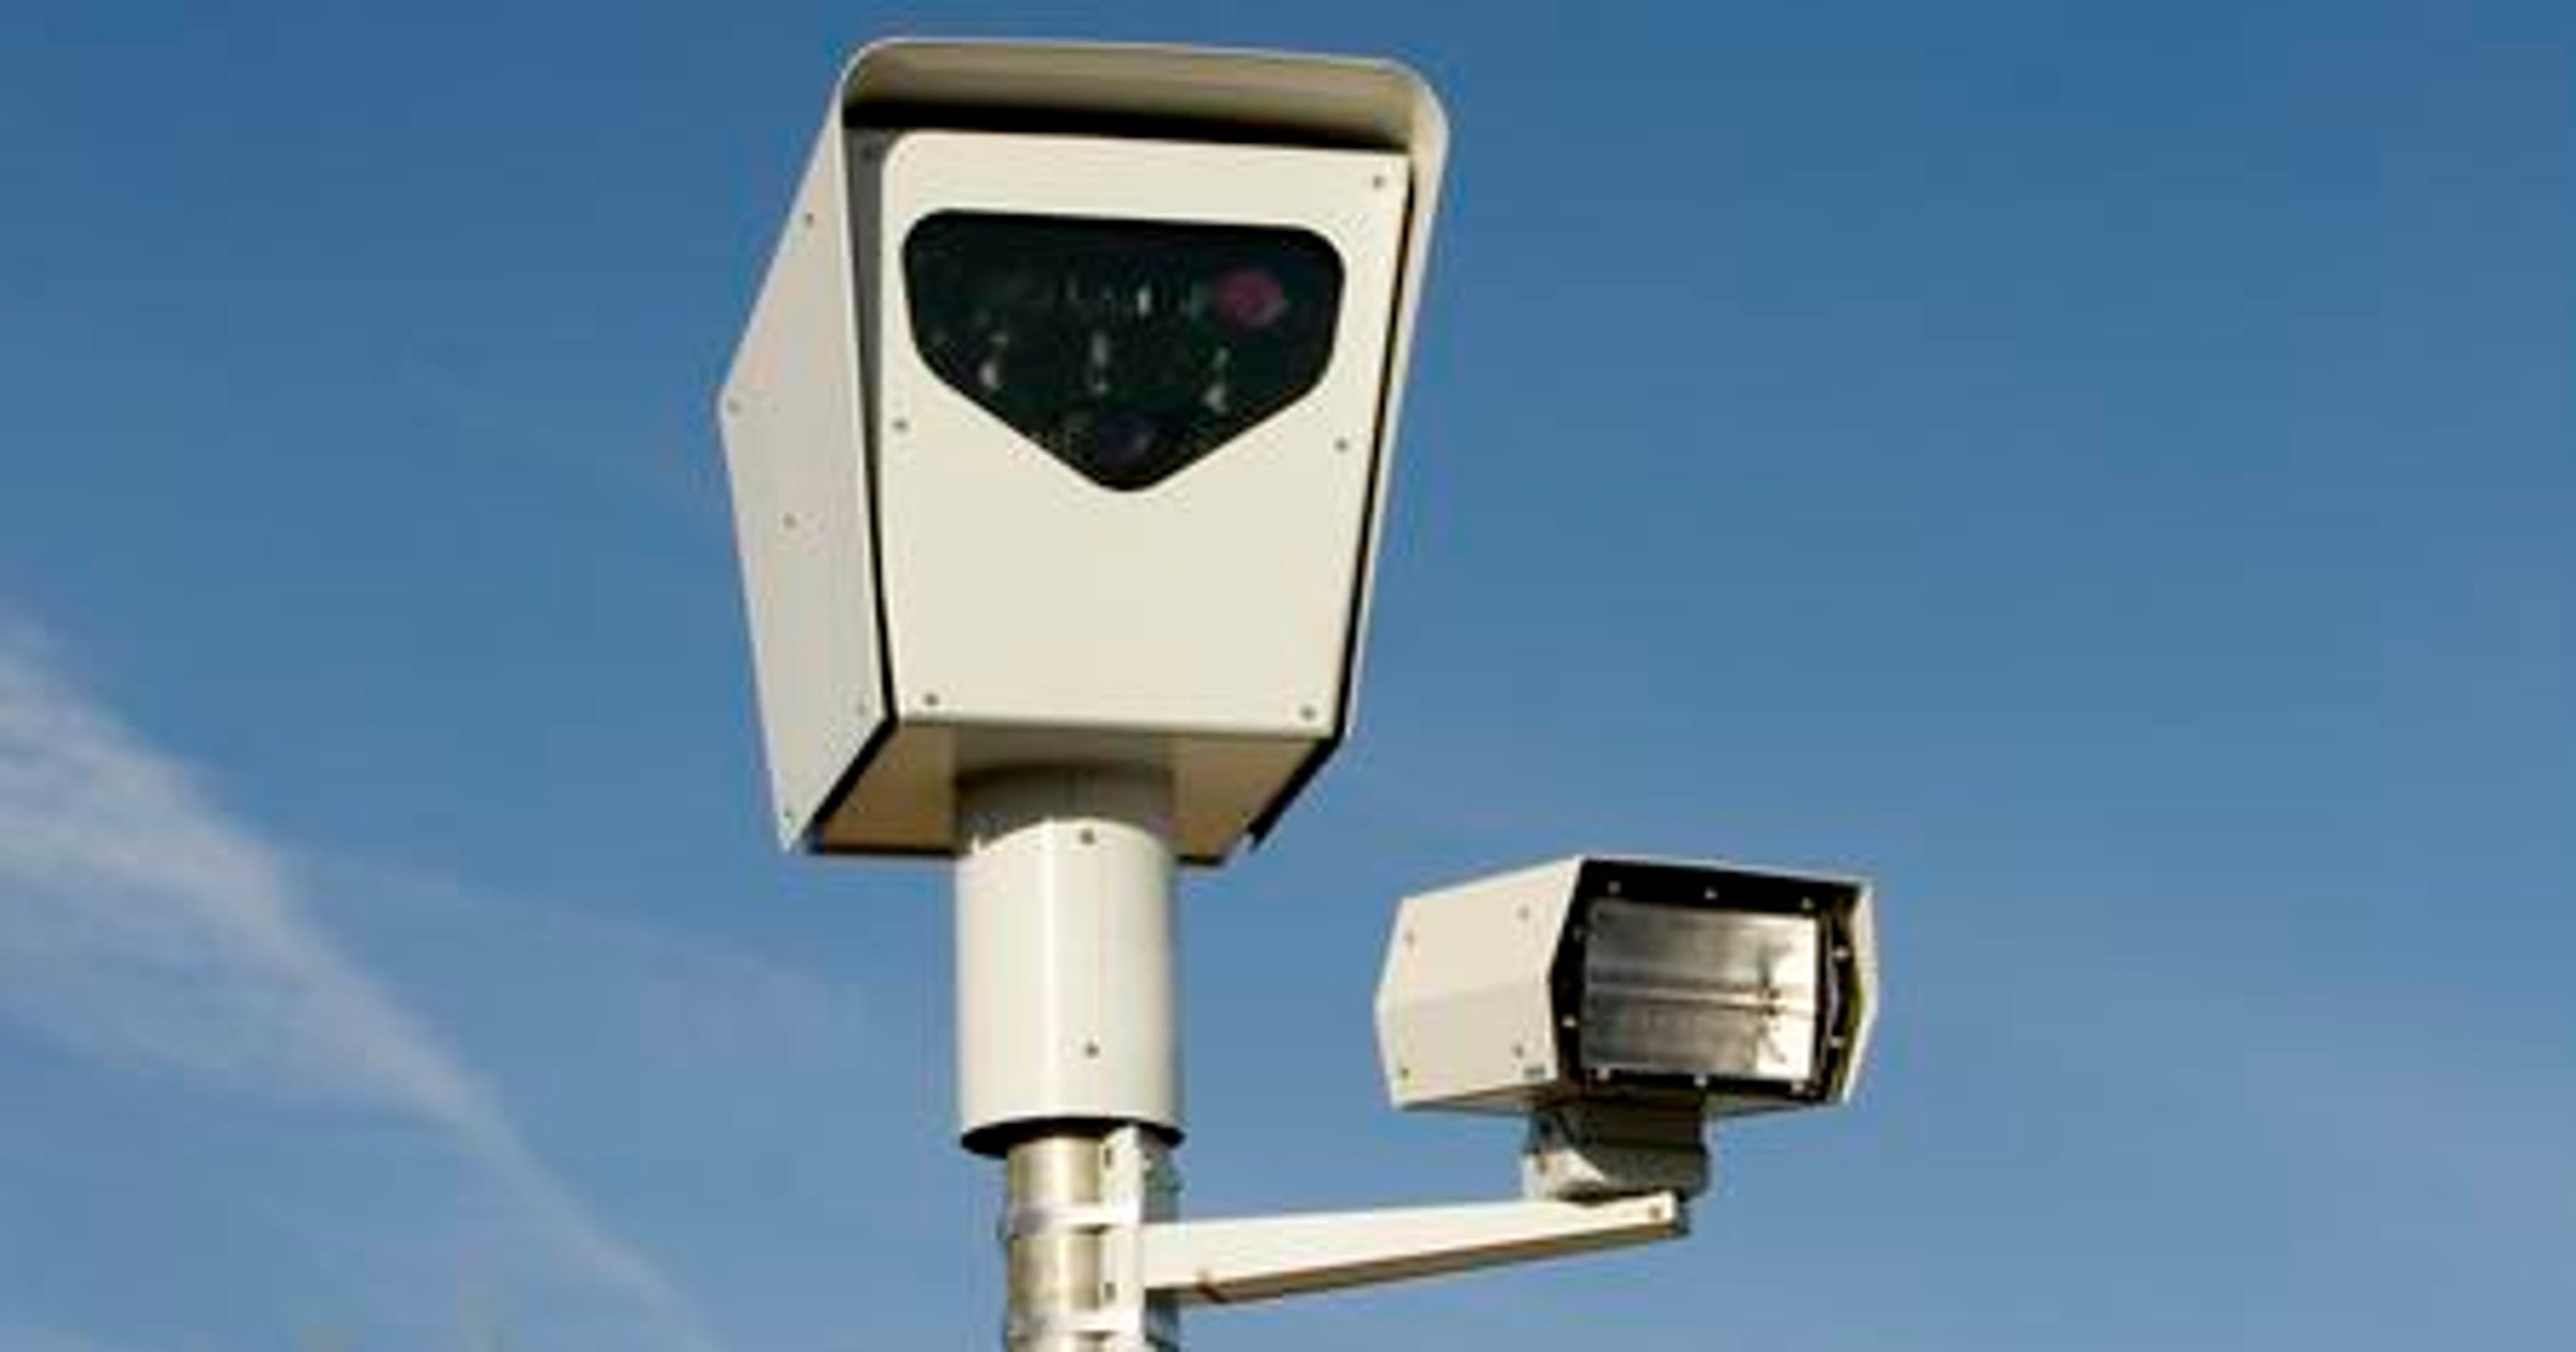 10 Iowa traffic cameras that could be turned off